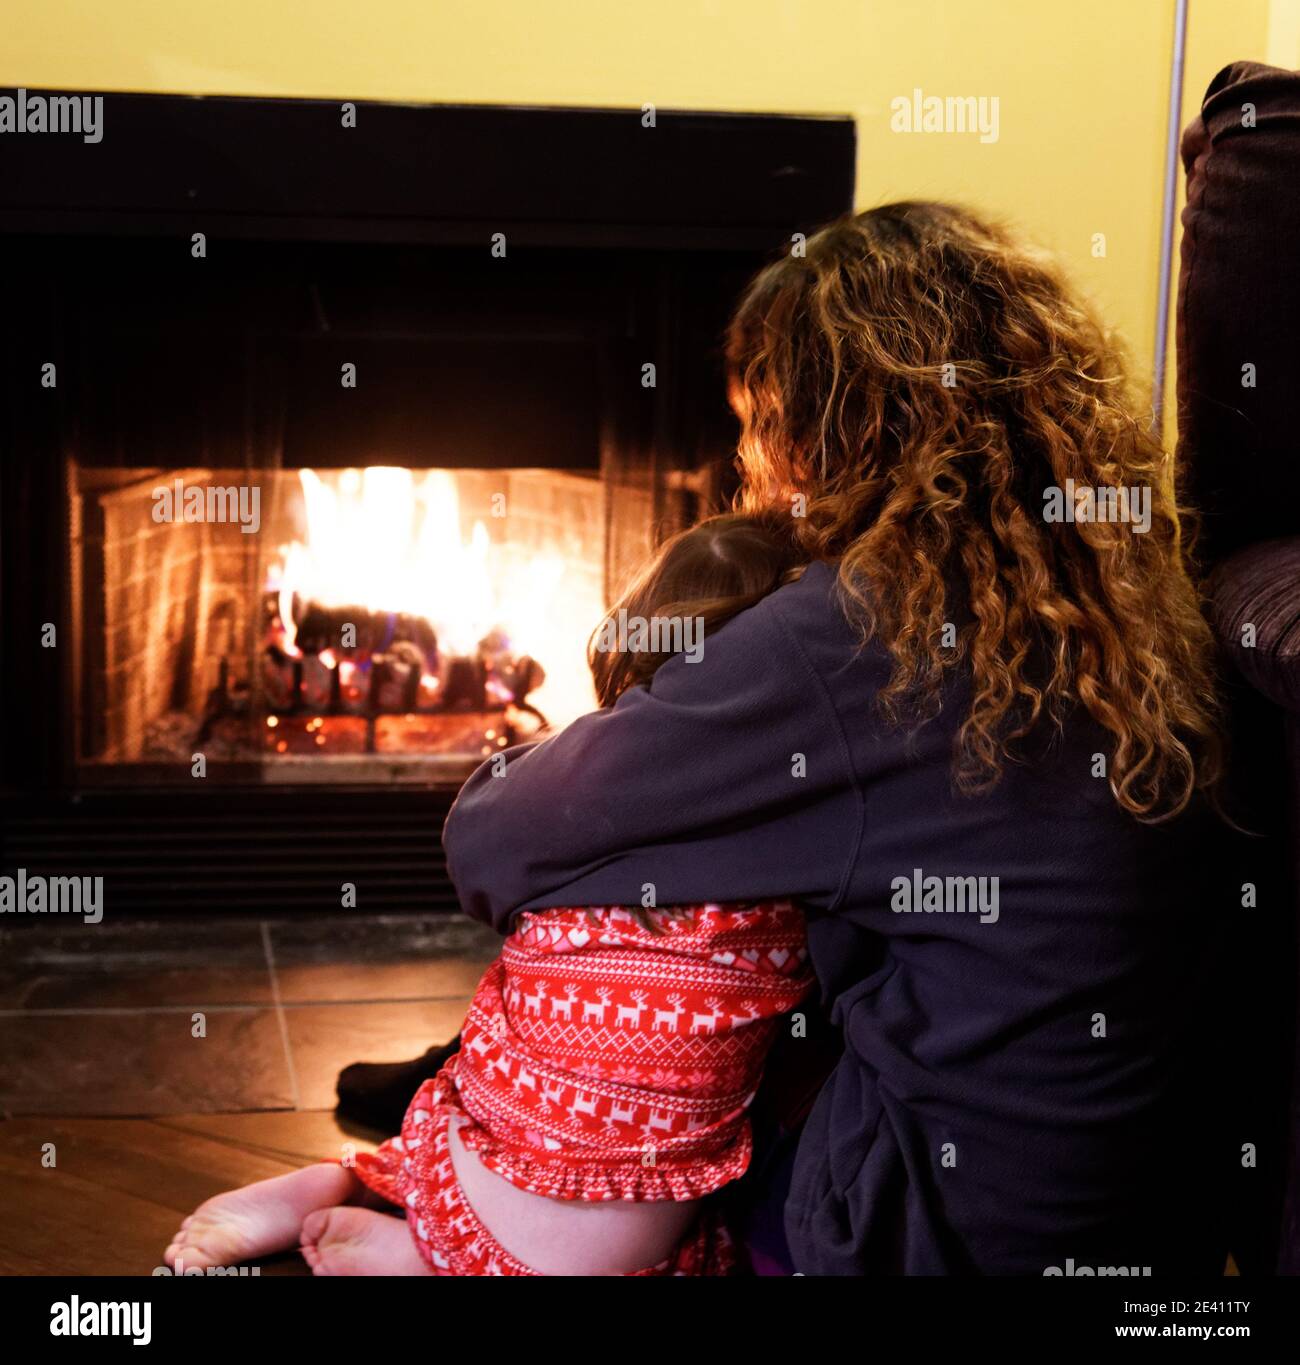 A mother and daughter cuddling each other in front of the fire in winter Stock Photo